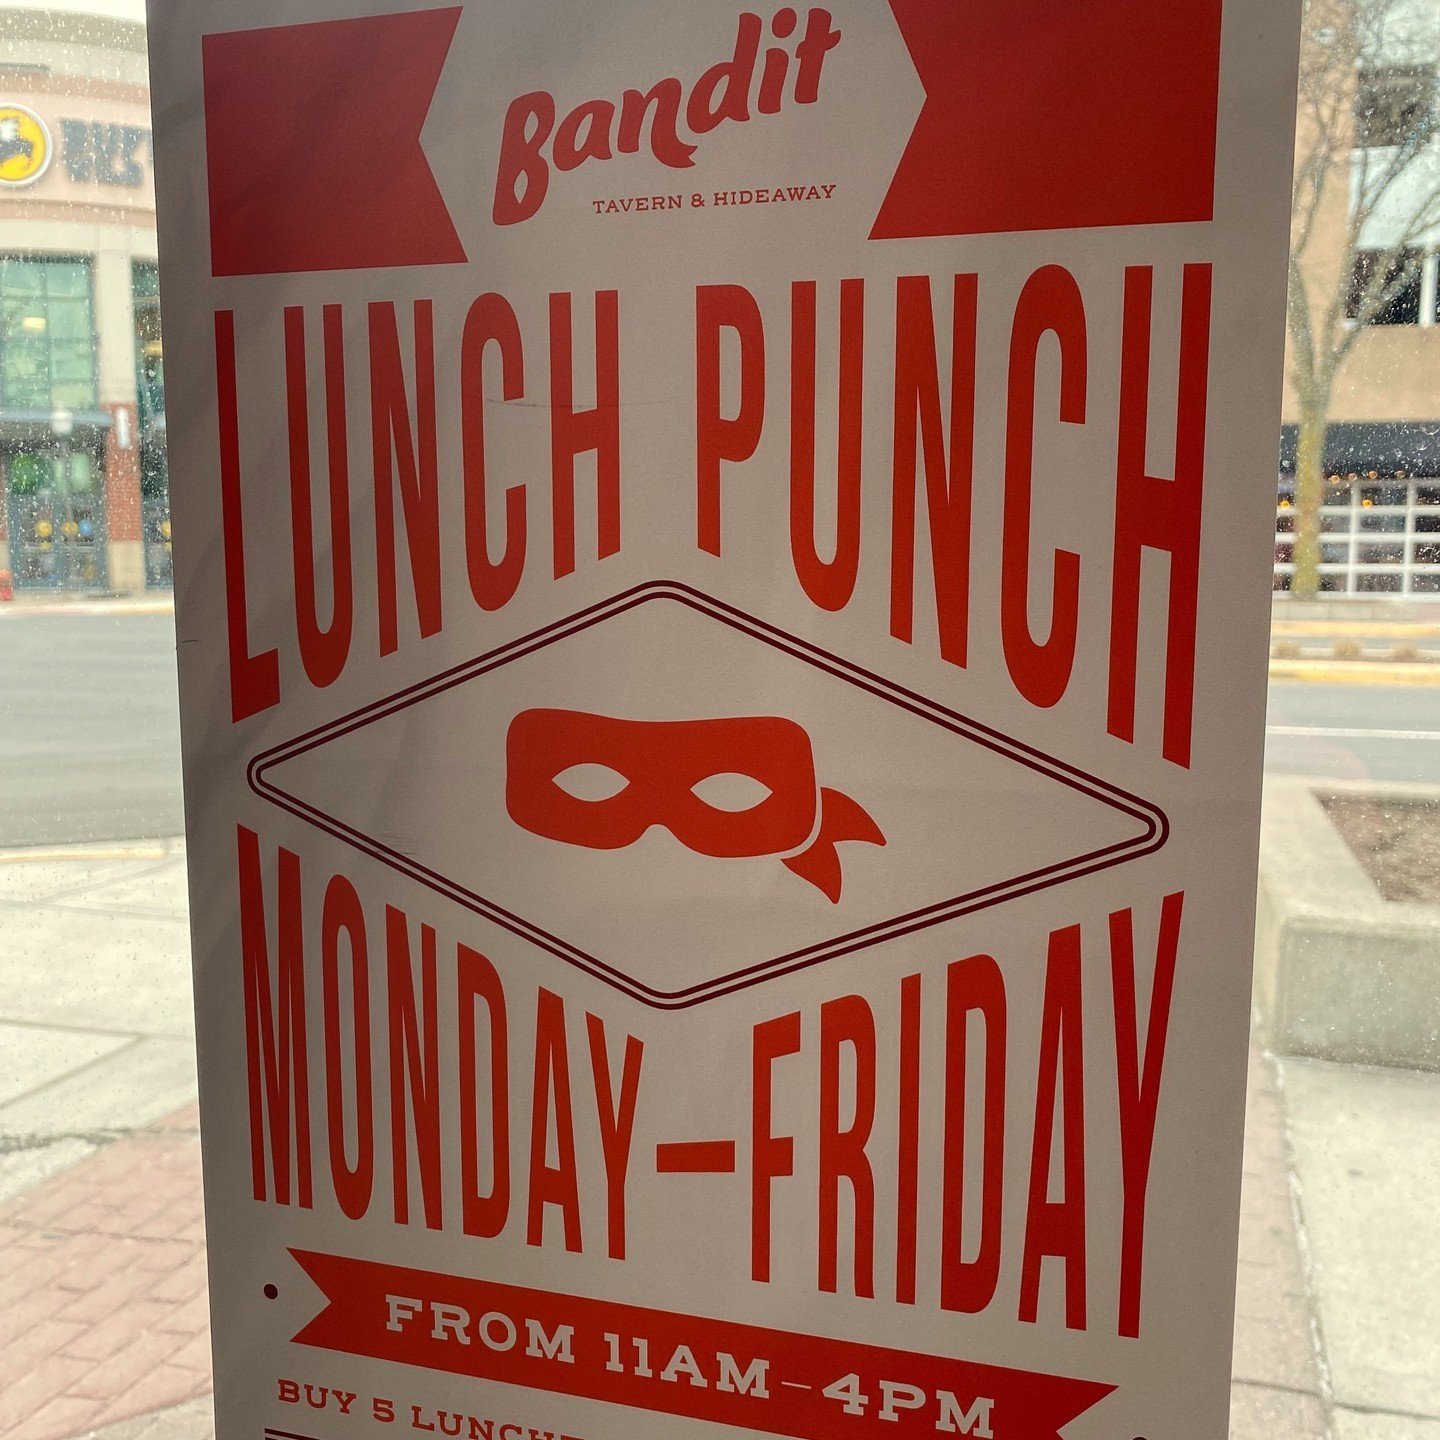 Tuesdays are for double punches! Join us for lunch, show your Lunch Punch Card and get TWO punches!!